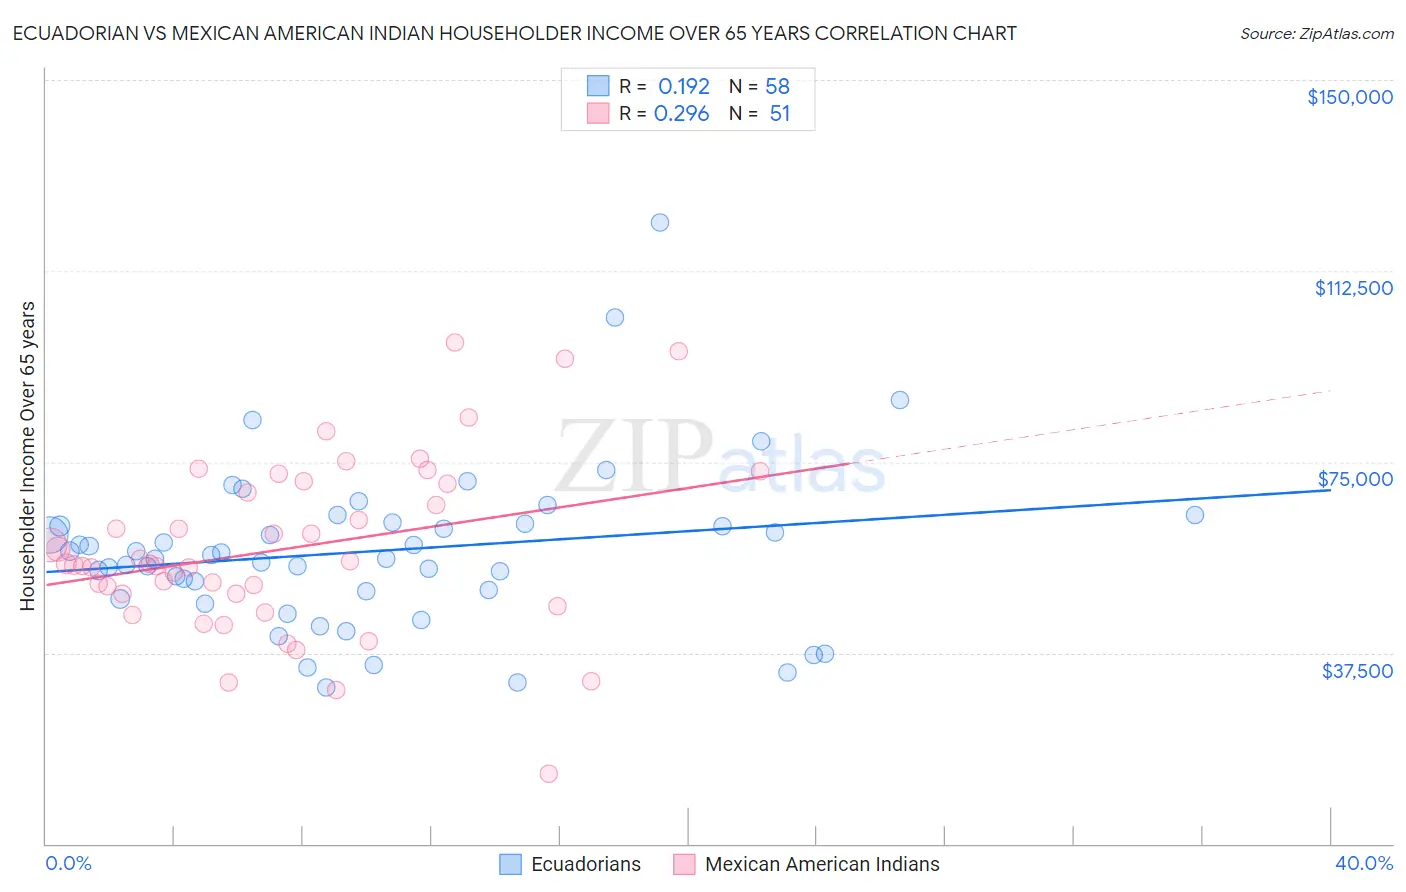 Ecuadorian vs Mexican American Indian Householder Income Over 65 years